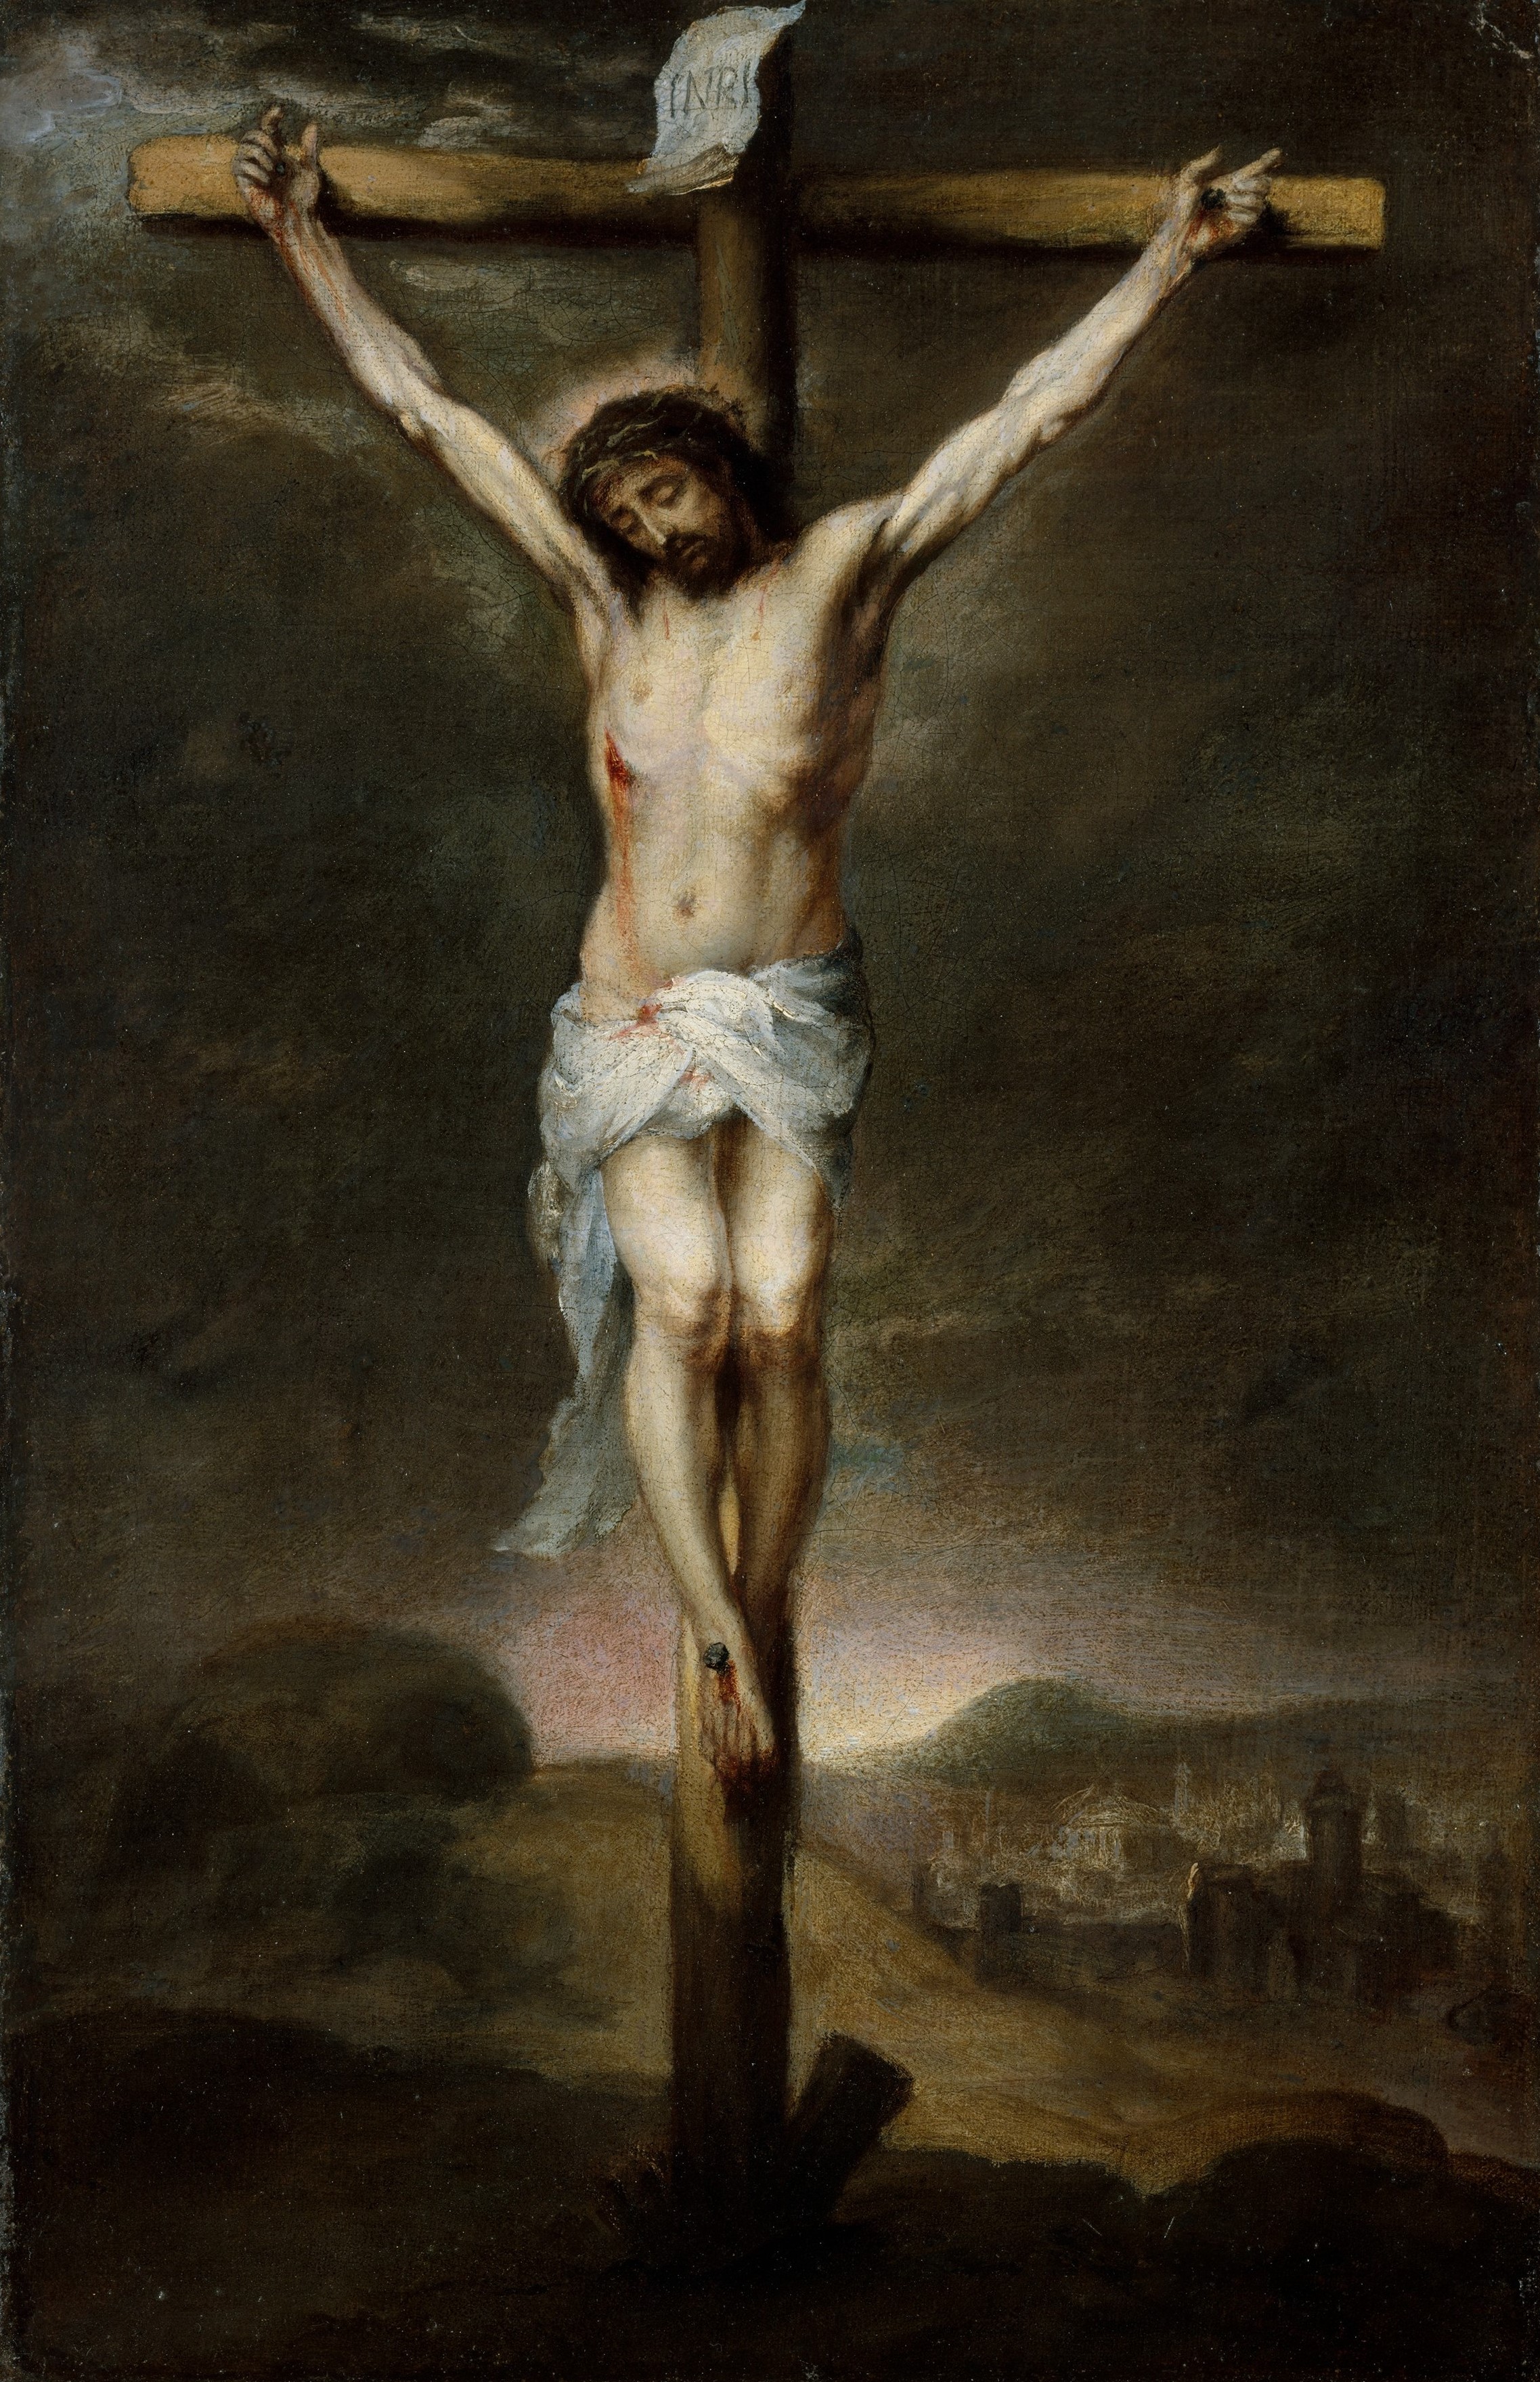 The Lord Shows Us on His Cross What Sin Does to the Human Heart